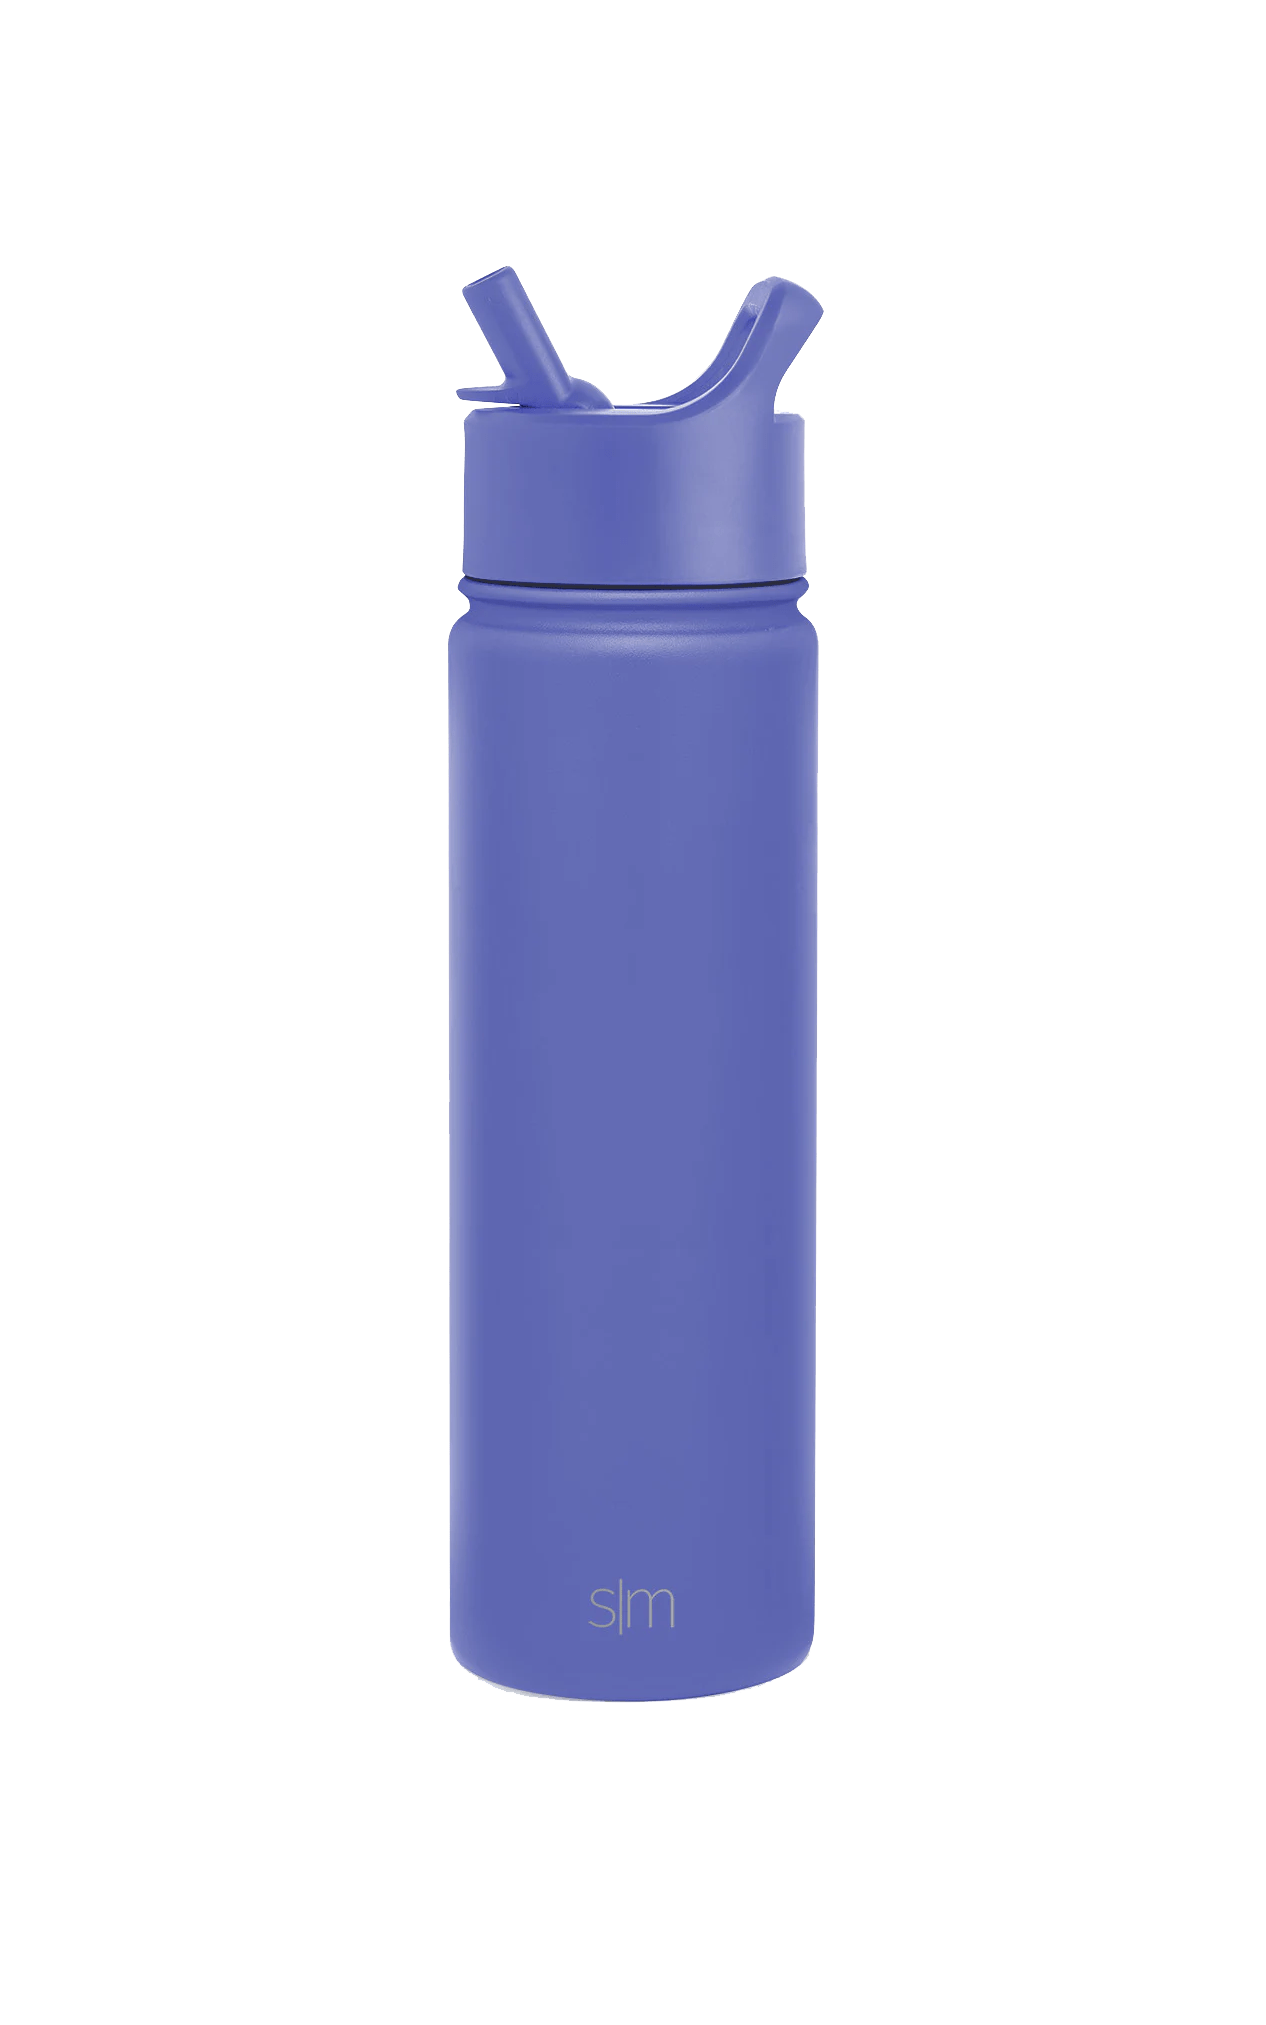 Engraved Water Bottles With Straw, Personalized Insulated Water